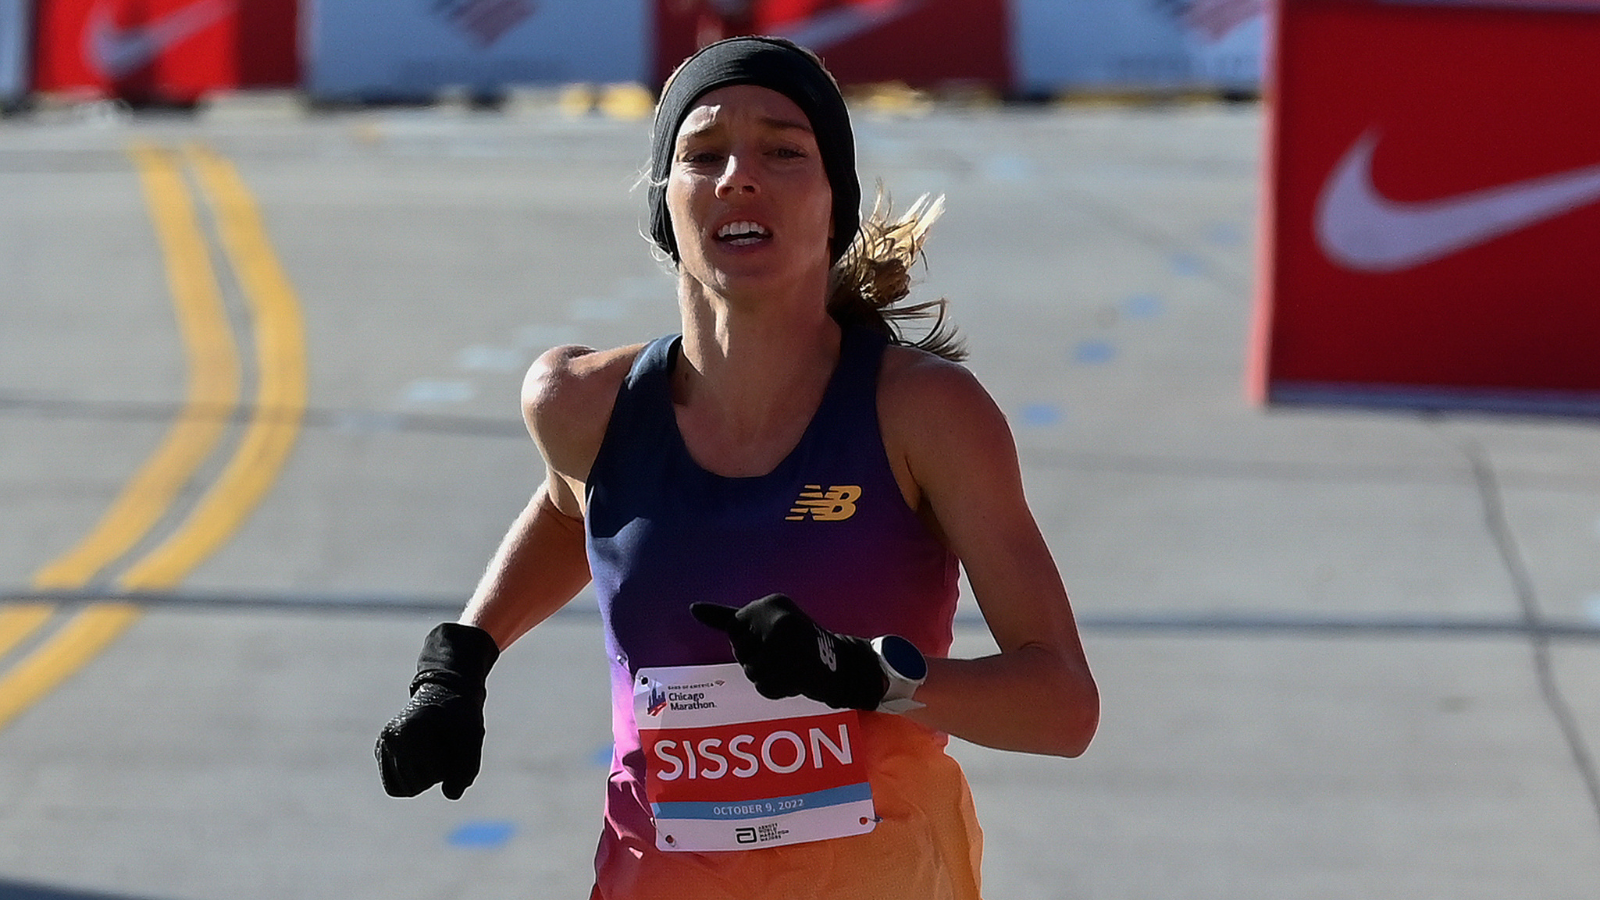 Former Omaha Marian Runner Emily Sisson Qualifies for Second Olympics in Marathon